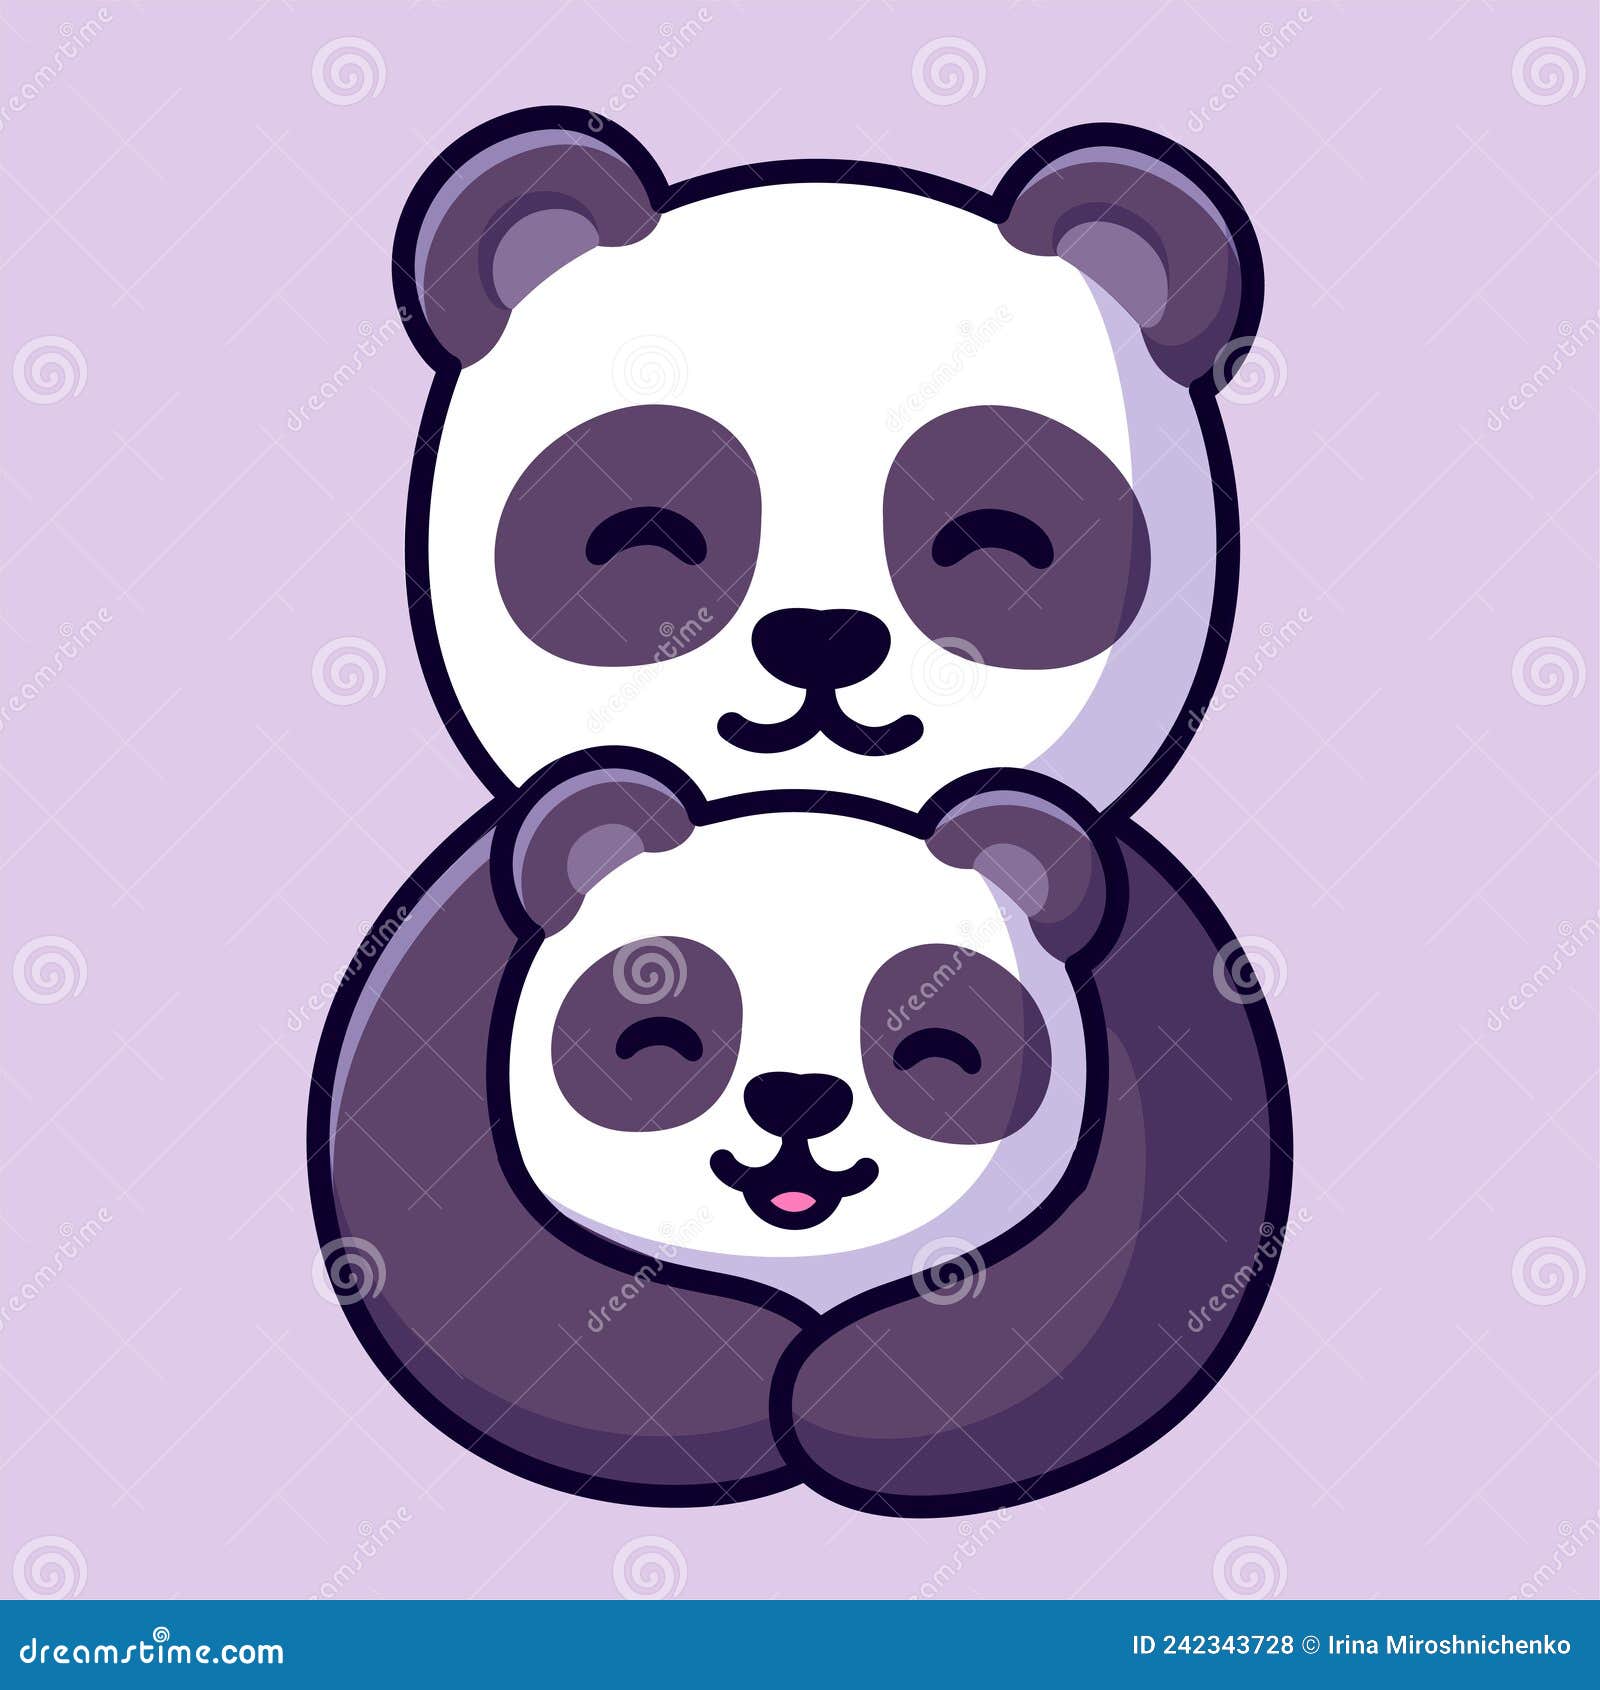 Cute Funny Baby Panda Hanging On The Bamboo Stock Photo, Picture and  Royalty Free Image. Image 94255211.